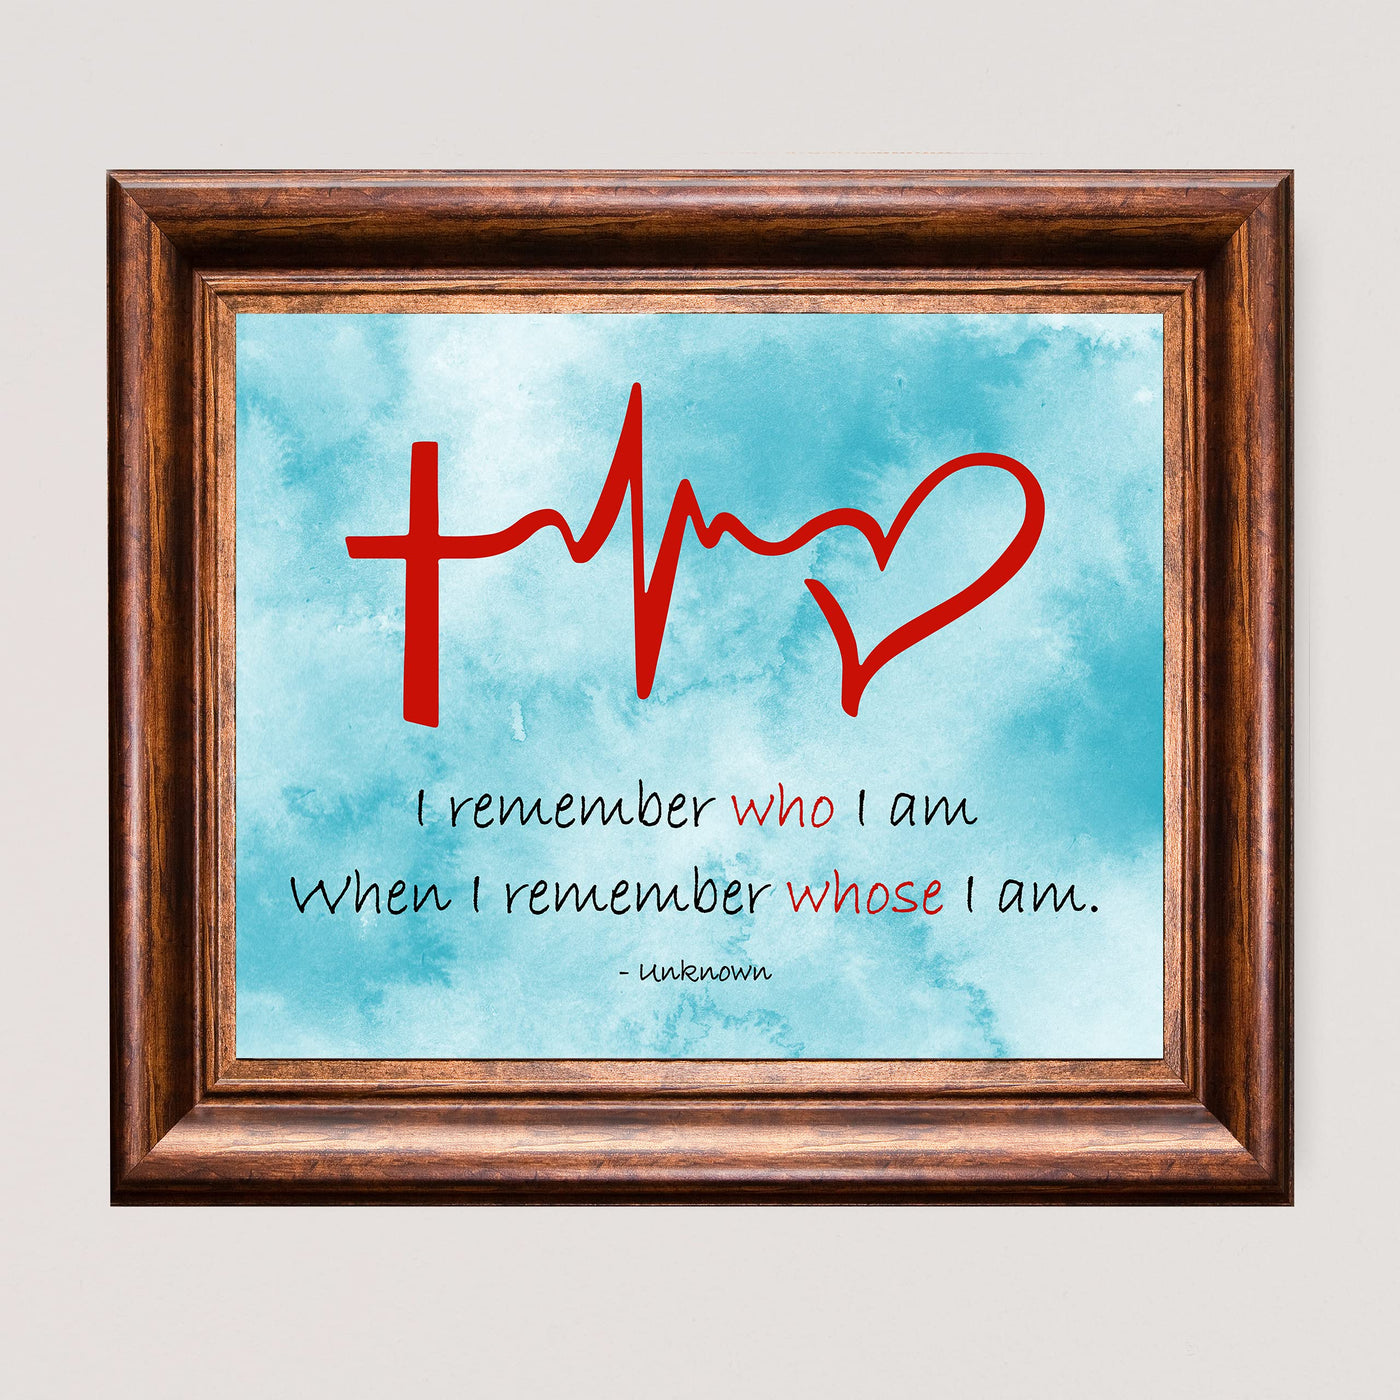 I Remember Whose I Am Spiritual Heartbeat Wall Art Sign -10 x 8" Christian Faith-Hope-Love Wall Print-Ready to Frame. Inspirational Decor for Home-Farmhouse-Office-Church. Great Religious Gift!